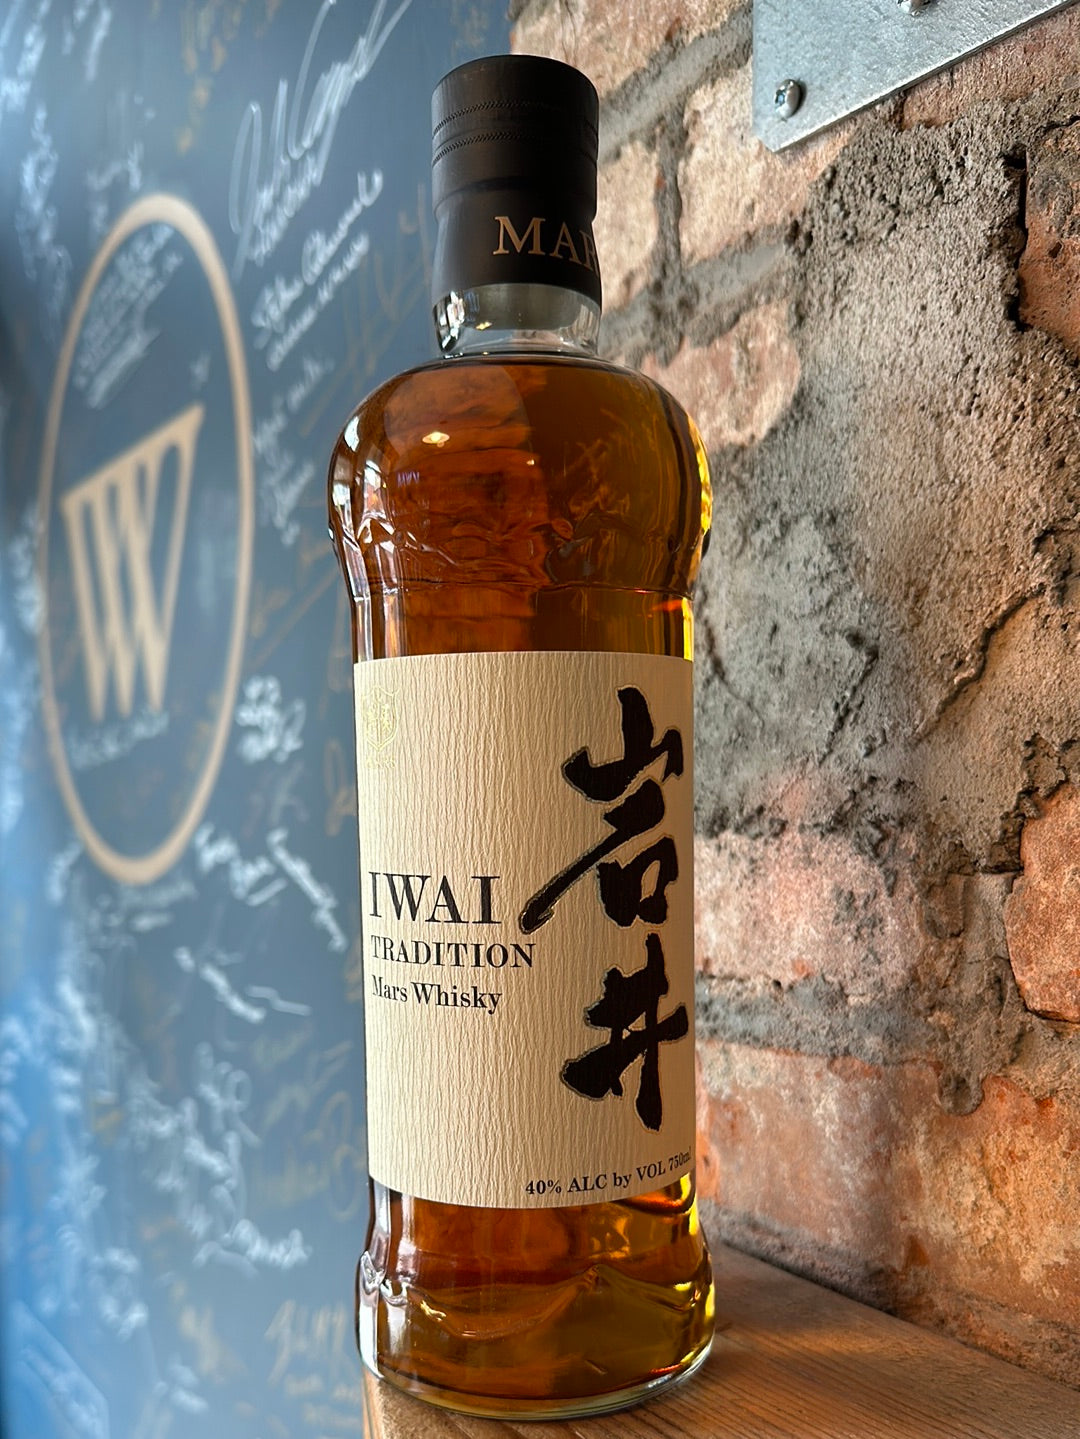 Mars Shinshu "Iwai Tradition" Whisky [NY STATE ONLY]